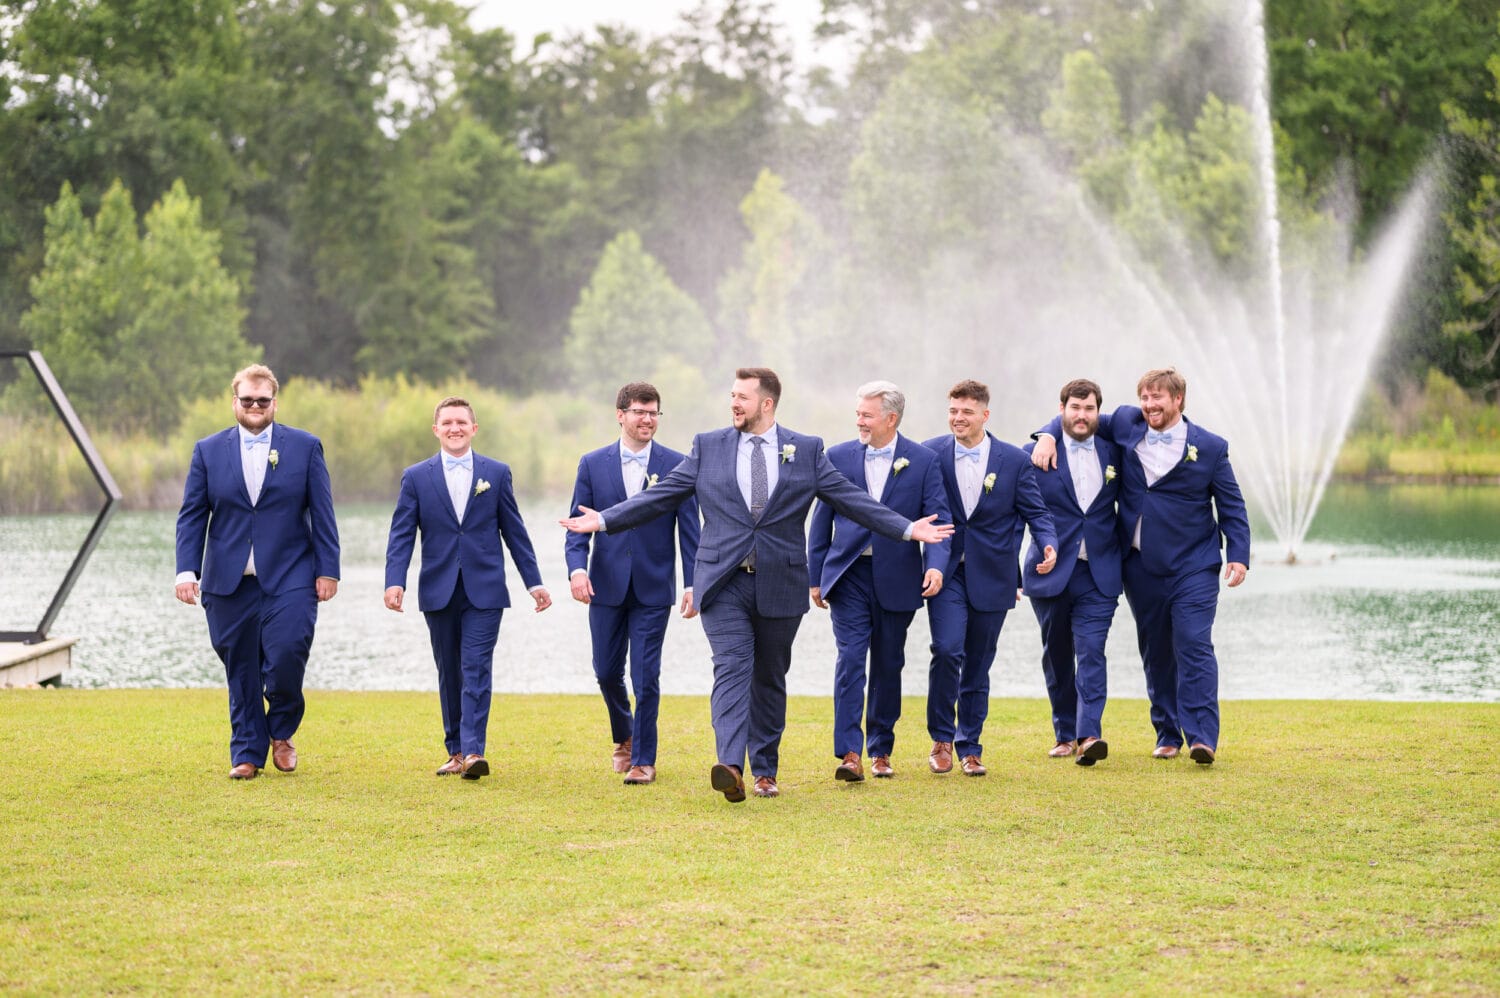 Pictures with the groom and groomsmen before the ceremony - The Venue at White Oaks Farm